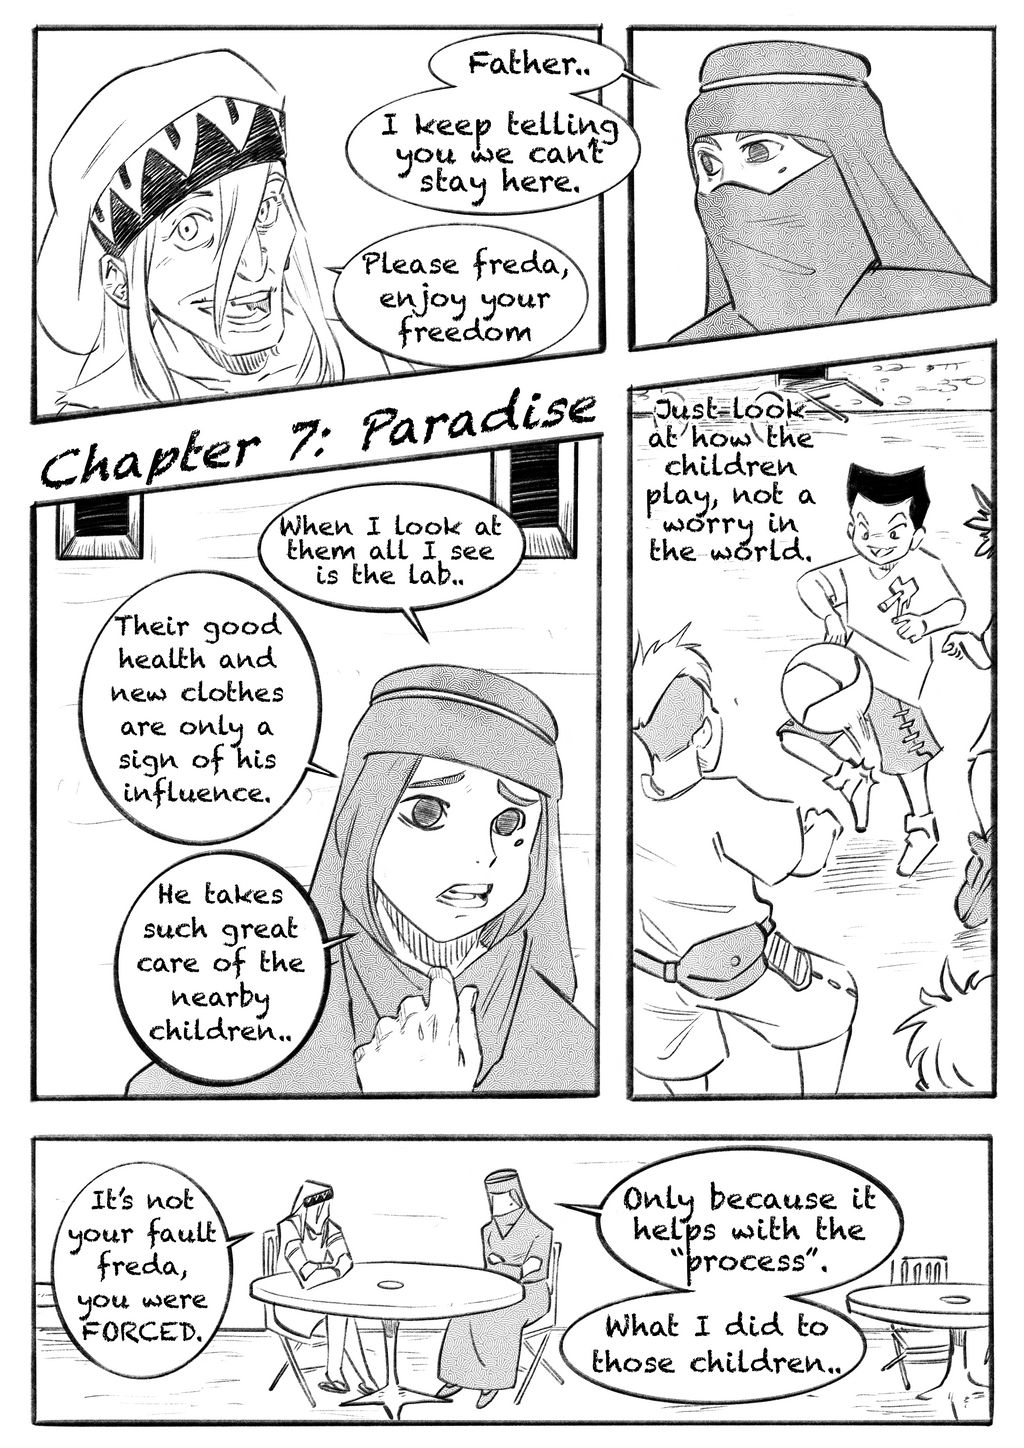 A miracle smile - PAGE 4 by RunStrayWolf on DeviantArt